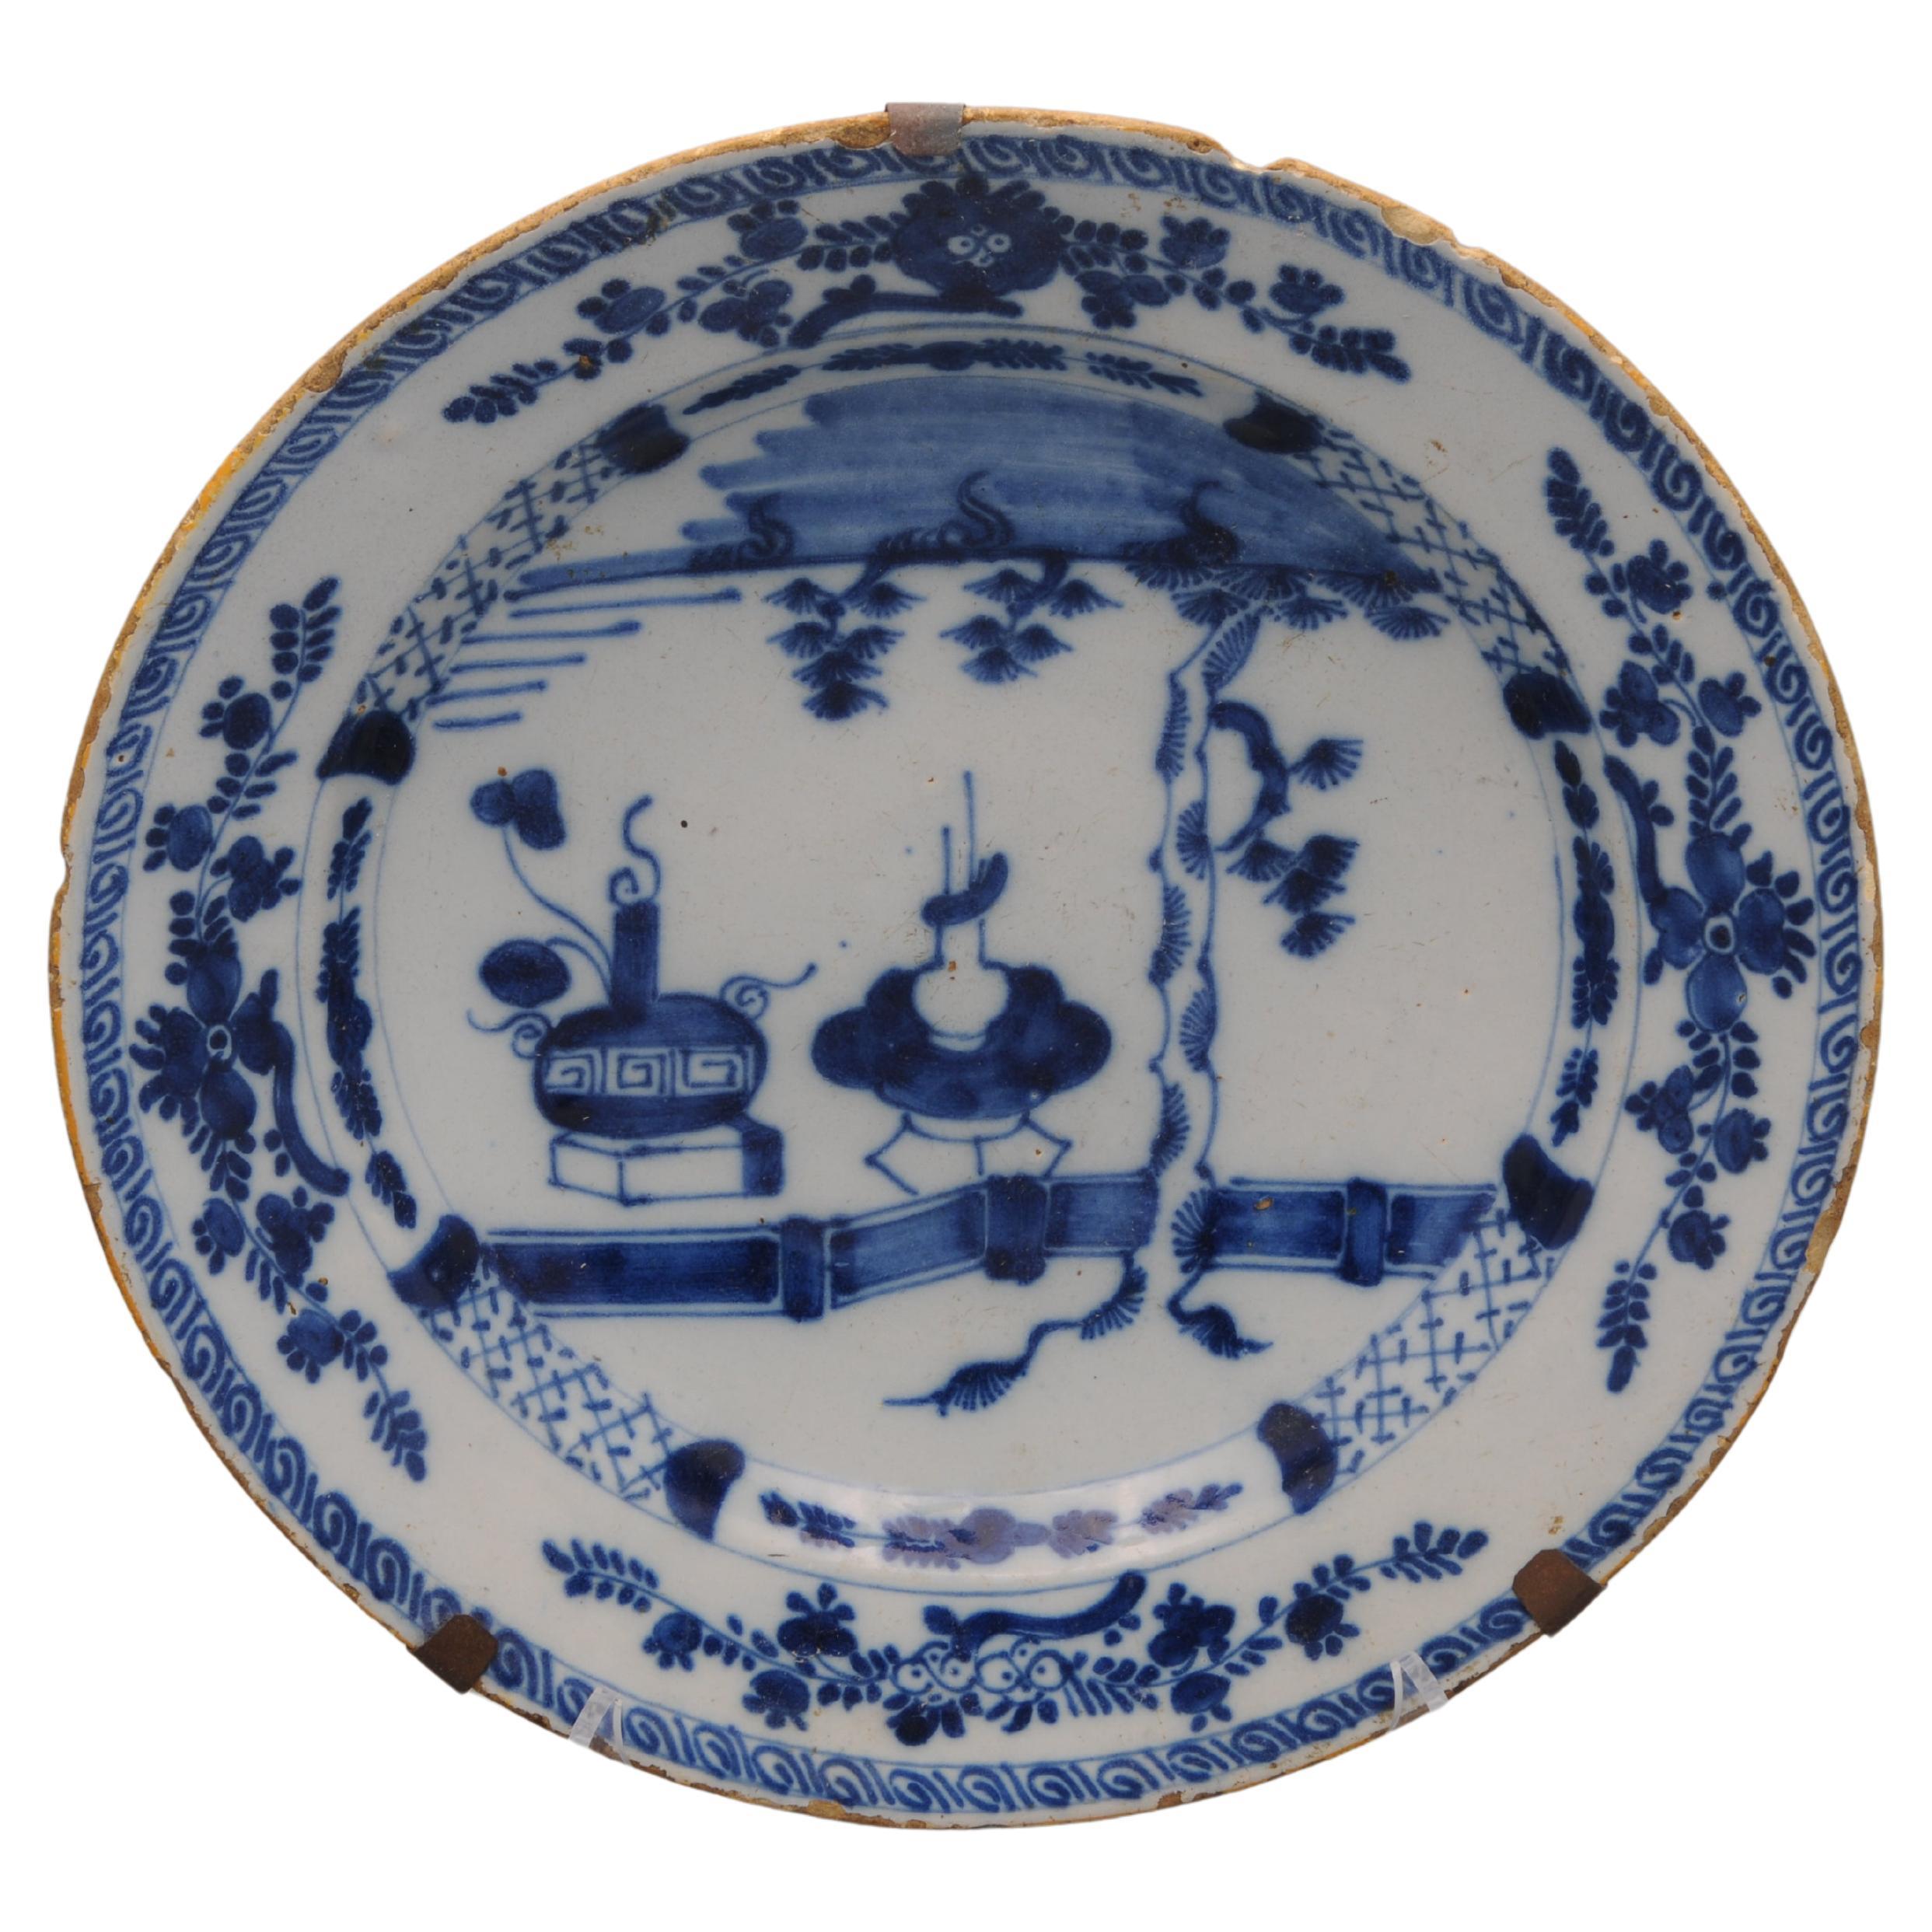 Delft - Chinoiserie style Charger by De Claauw, mid 18th century For Sale